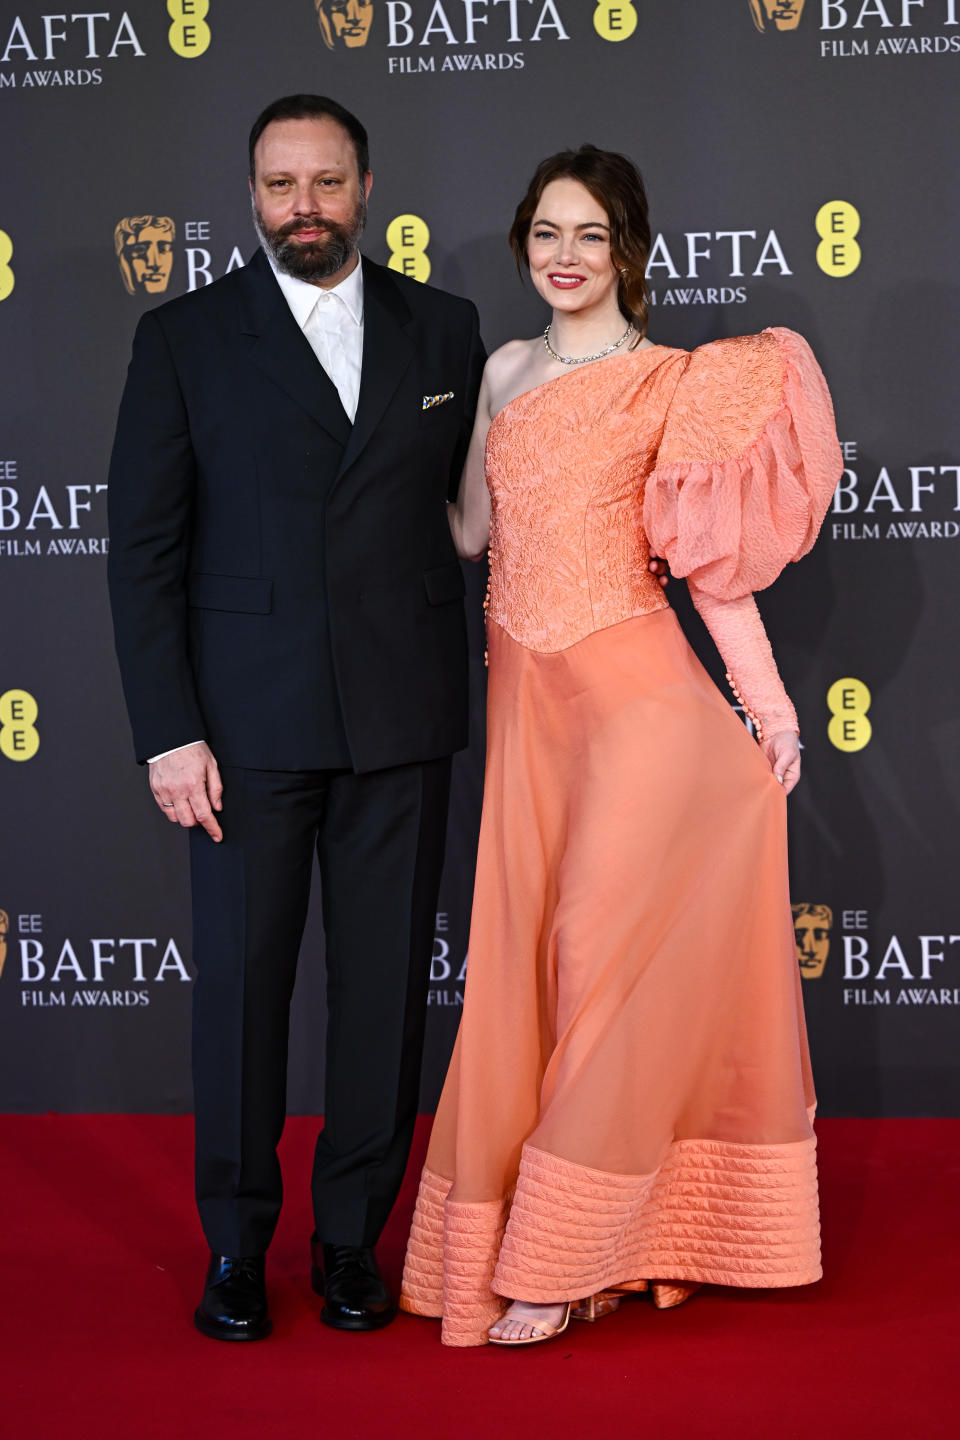 LONDON, ENGLAND - FEBRUARY 18: Yorgos Lanthimos and Emma Stone attend the 2024 EE BAFTA Film Awards at The Royal Festival Hall on February 18, 2024 in London, England. (Photo by Stephane Cardinale - Corbis/Corbis via Getty Images)